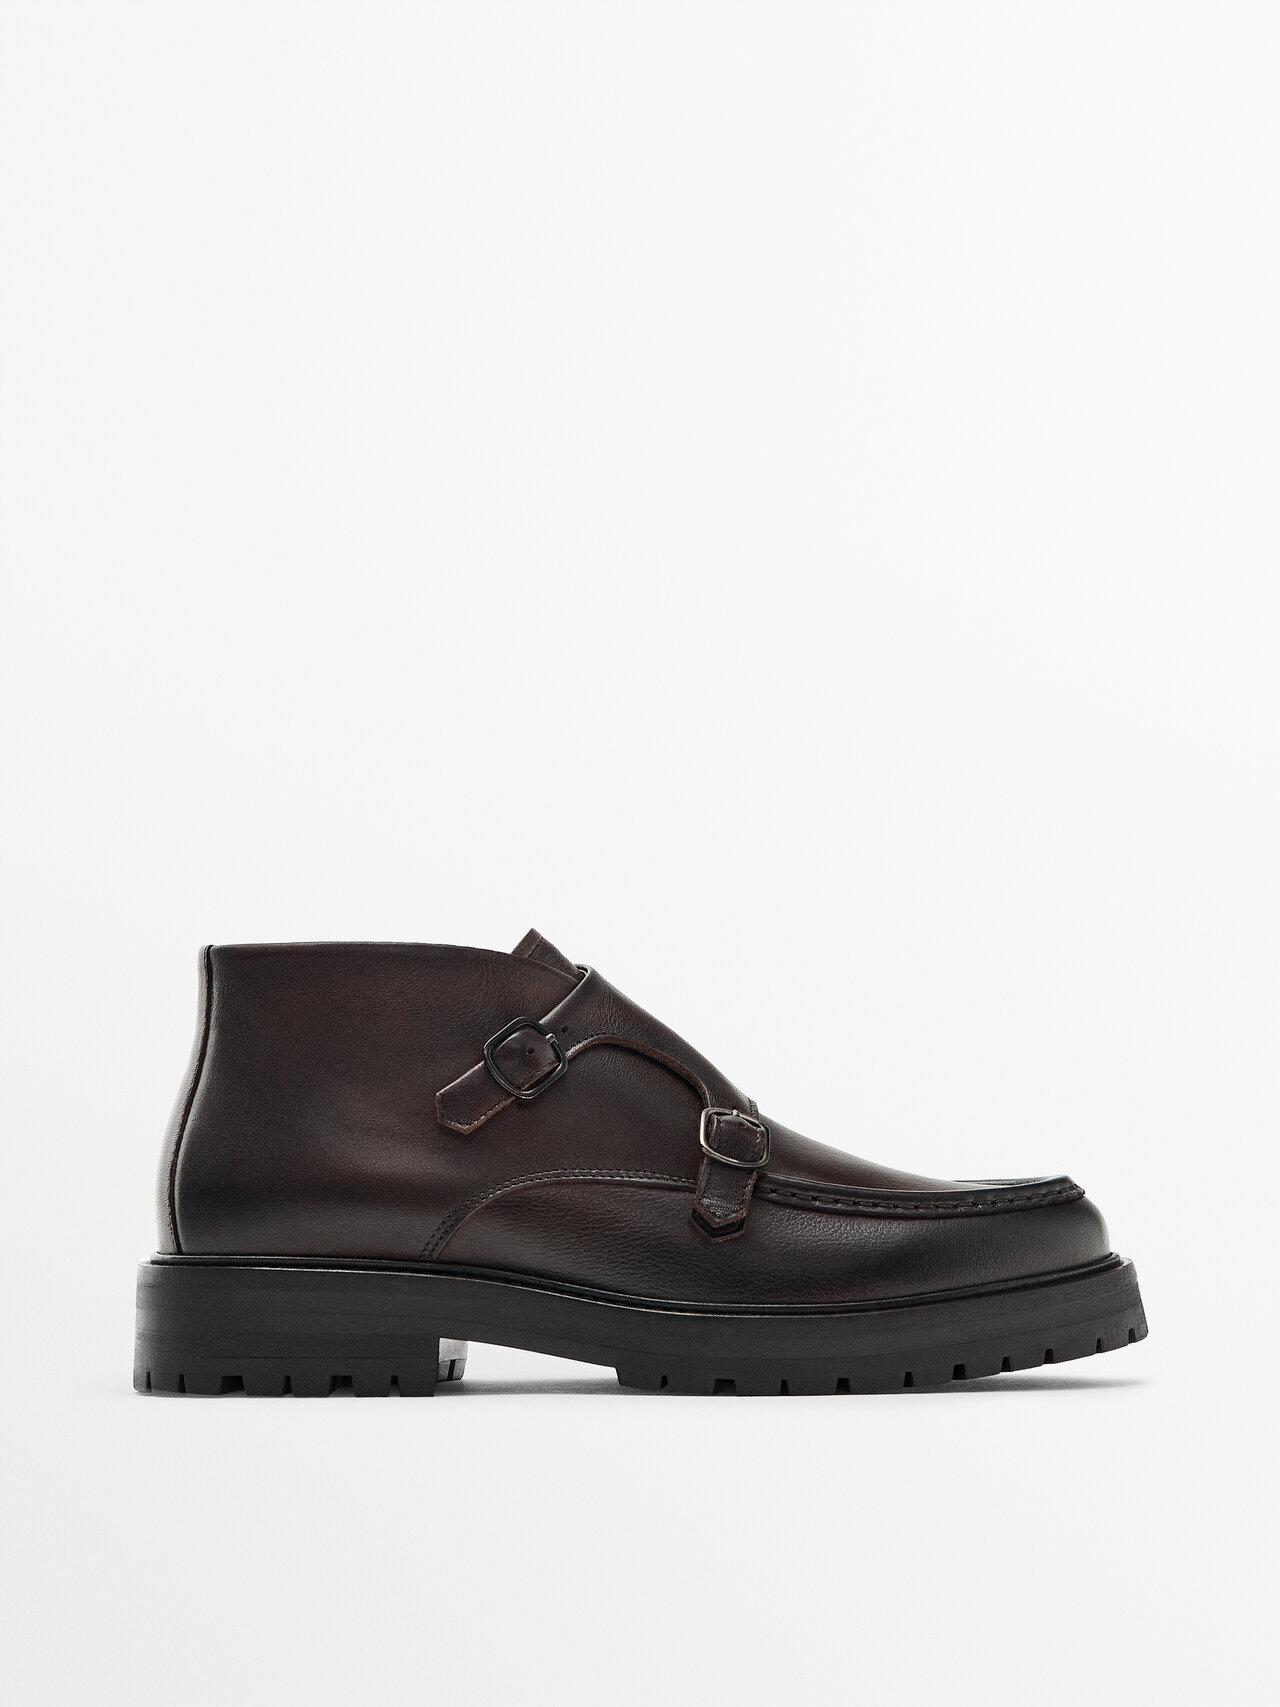 Massimo Dutti Nappa Leather Monk Ankle Boots In Brown